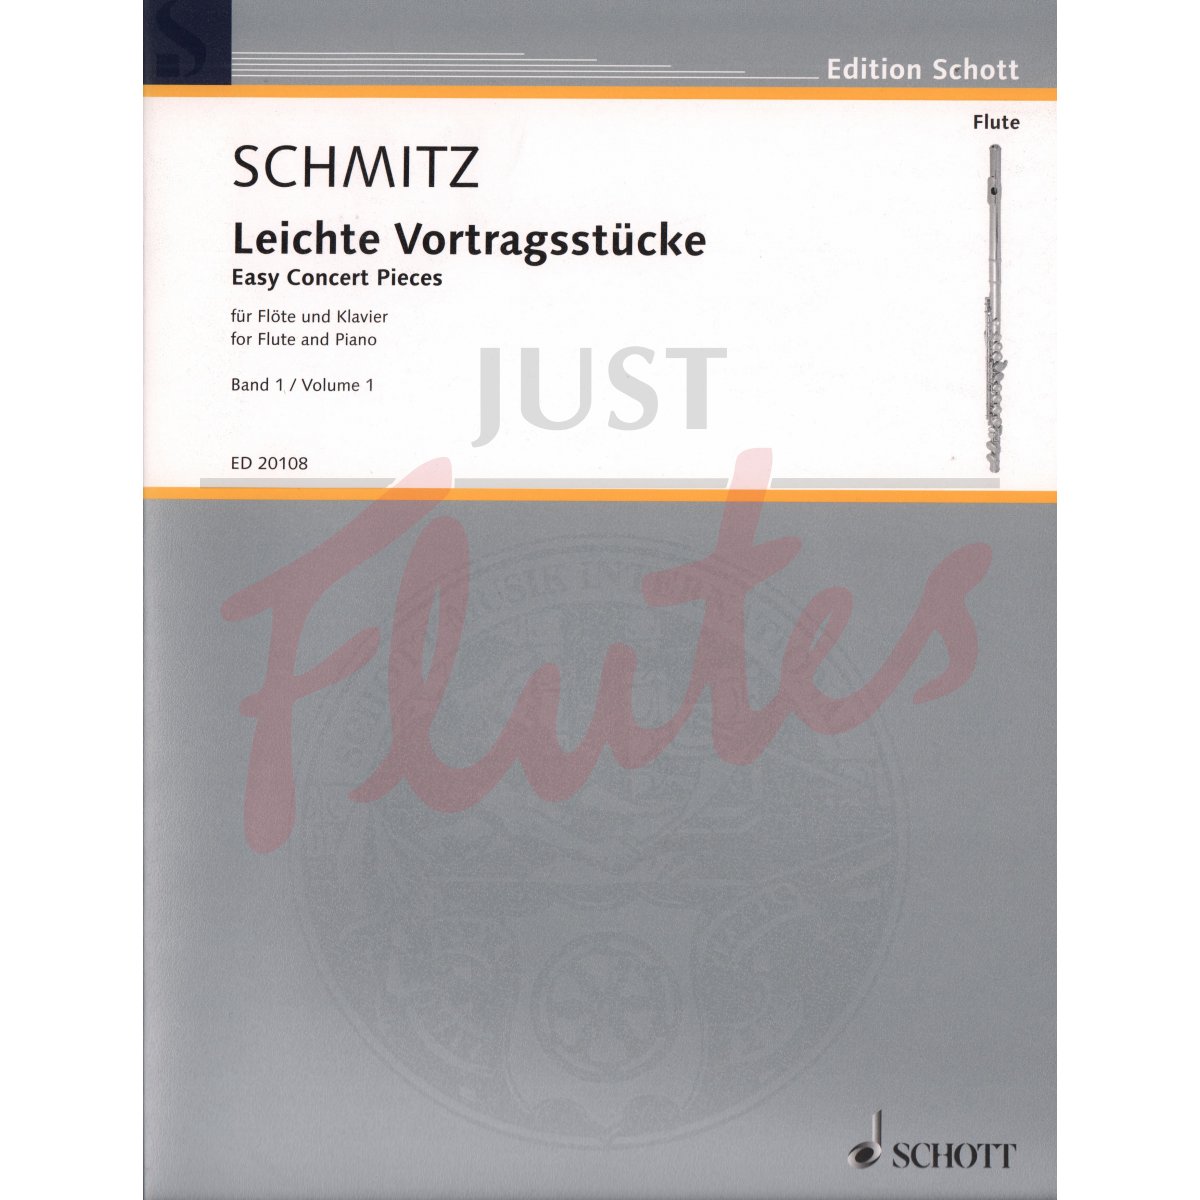 Easy Concert Pieces for Flute and Piano, Vol 1